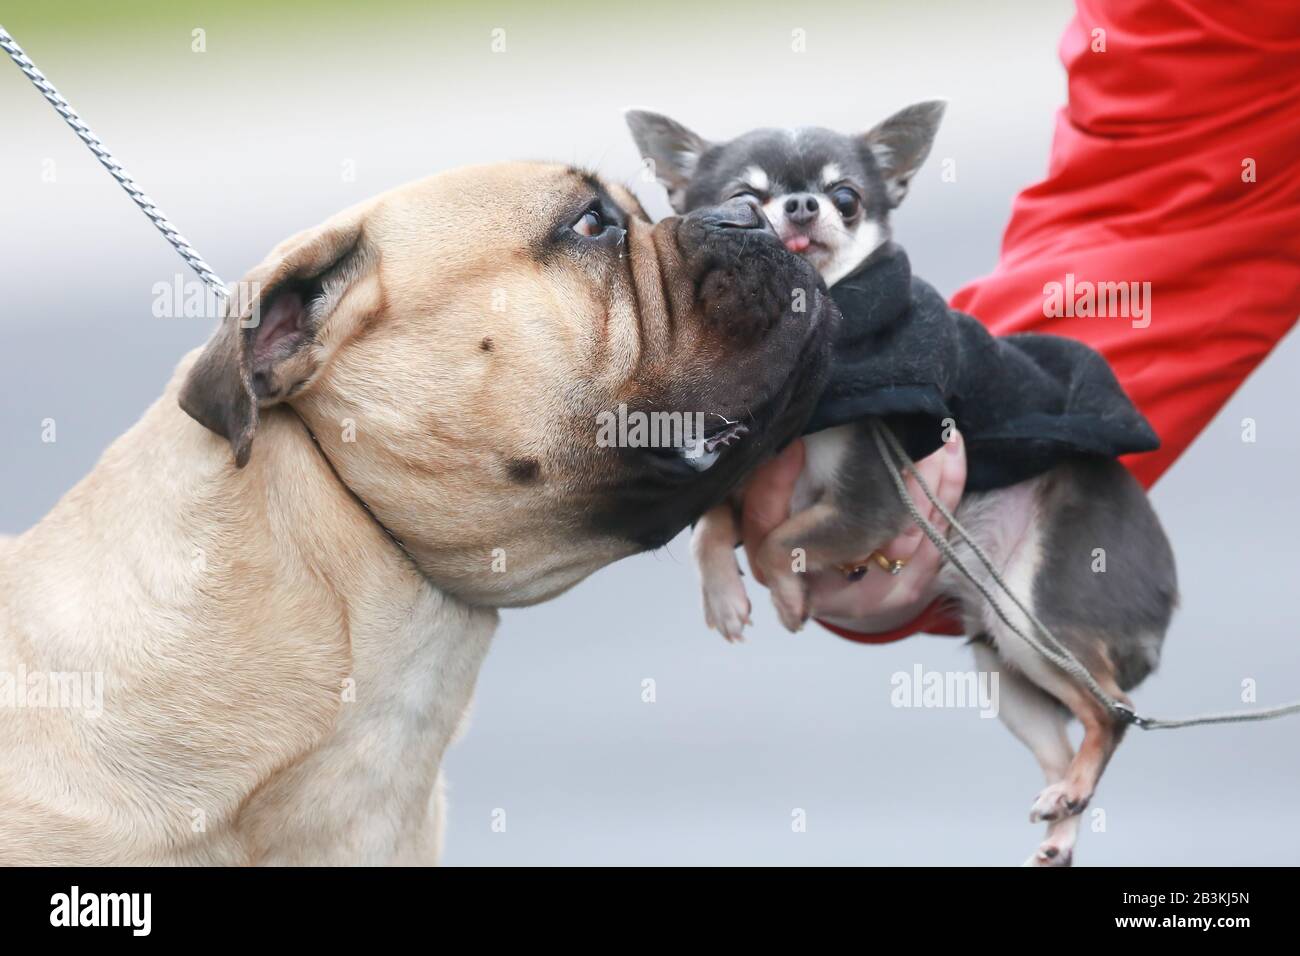 Birmingham NEC, UK. Dogs and their owners descend on the NEC Crufts 2020 show for Day One - Utility and Toy categories. A big dog makes friends with a rather nervous little dog. Credit: Peter Lopeman/Alamy Live News Stock Photo